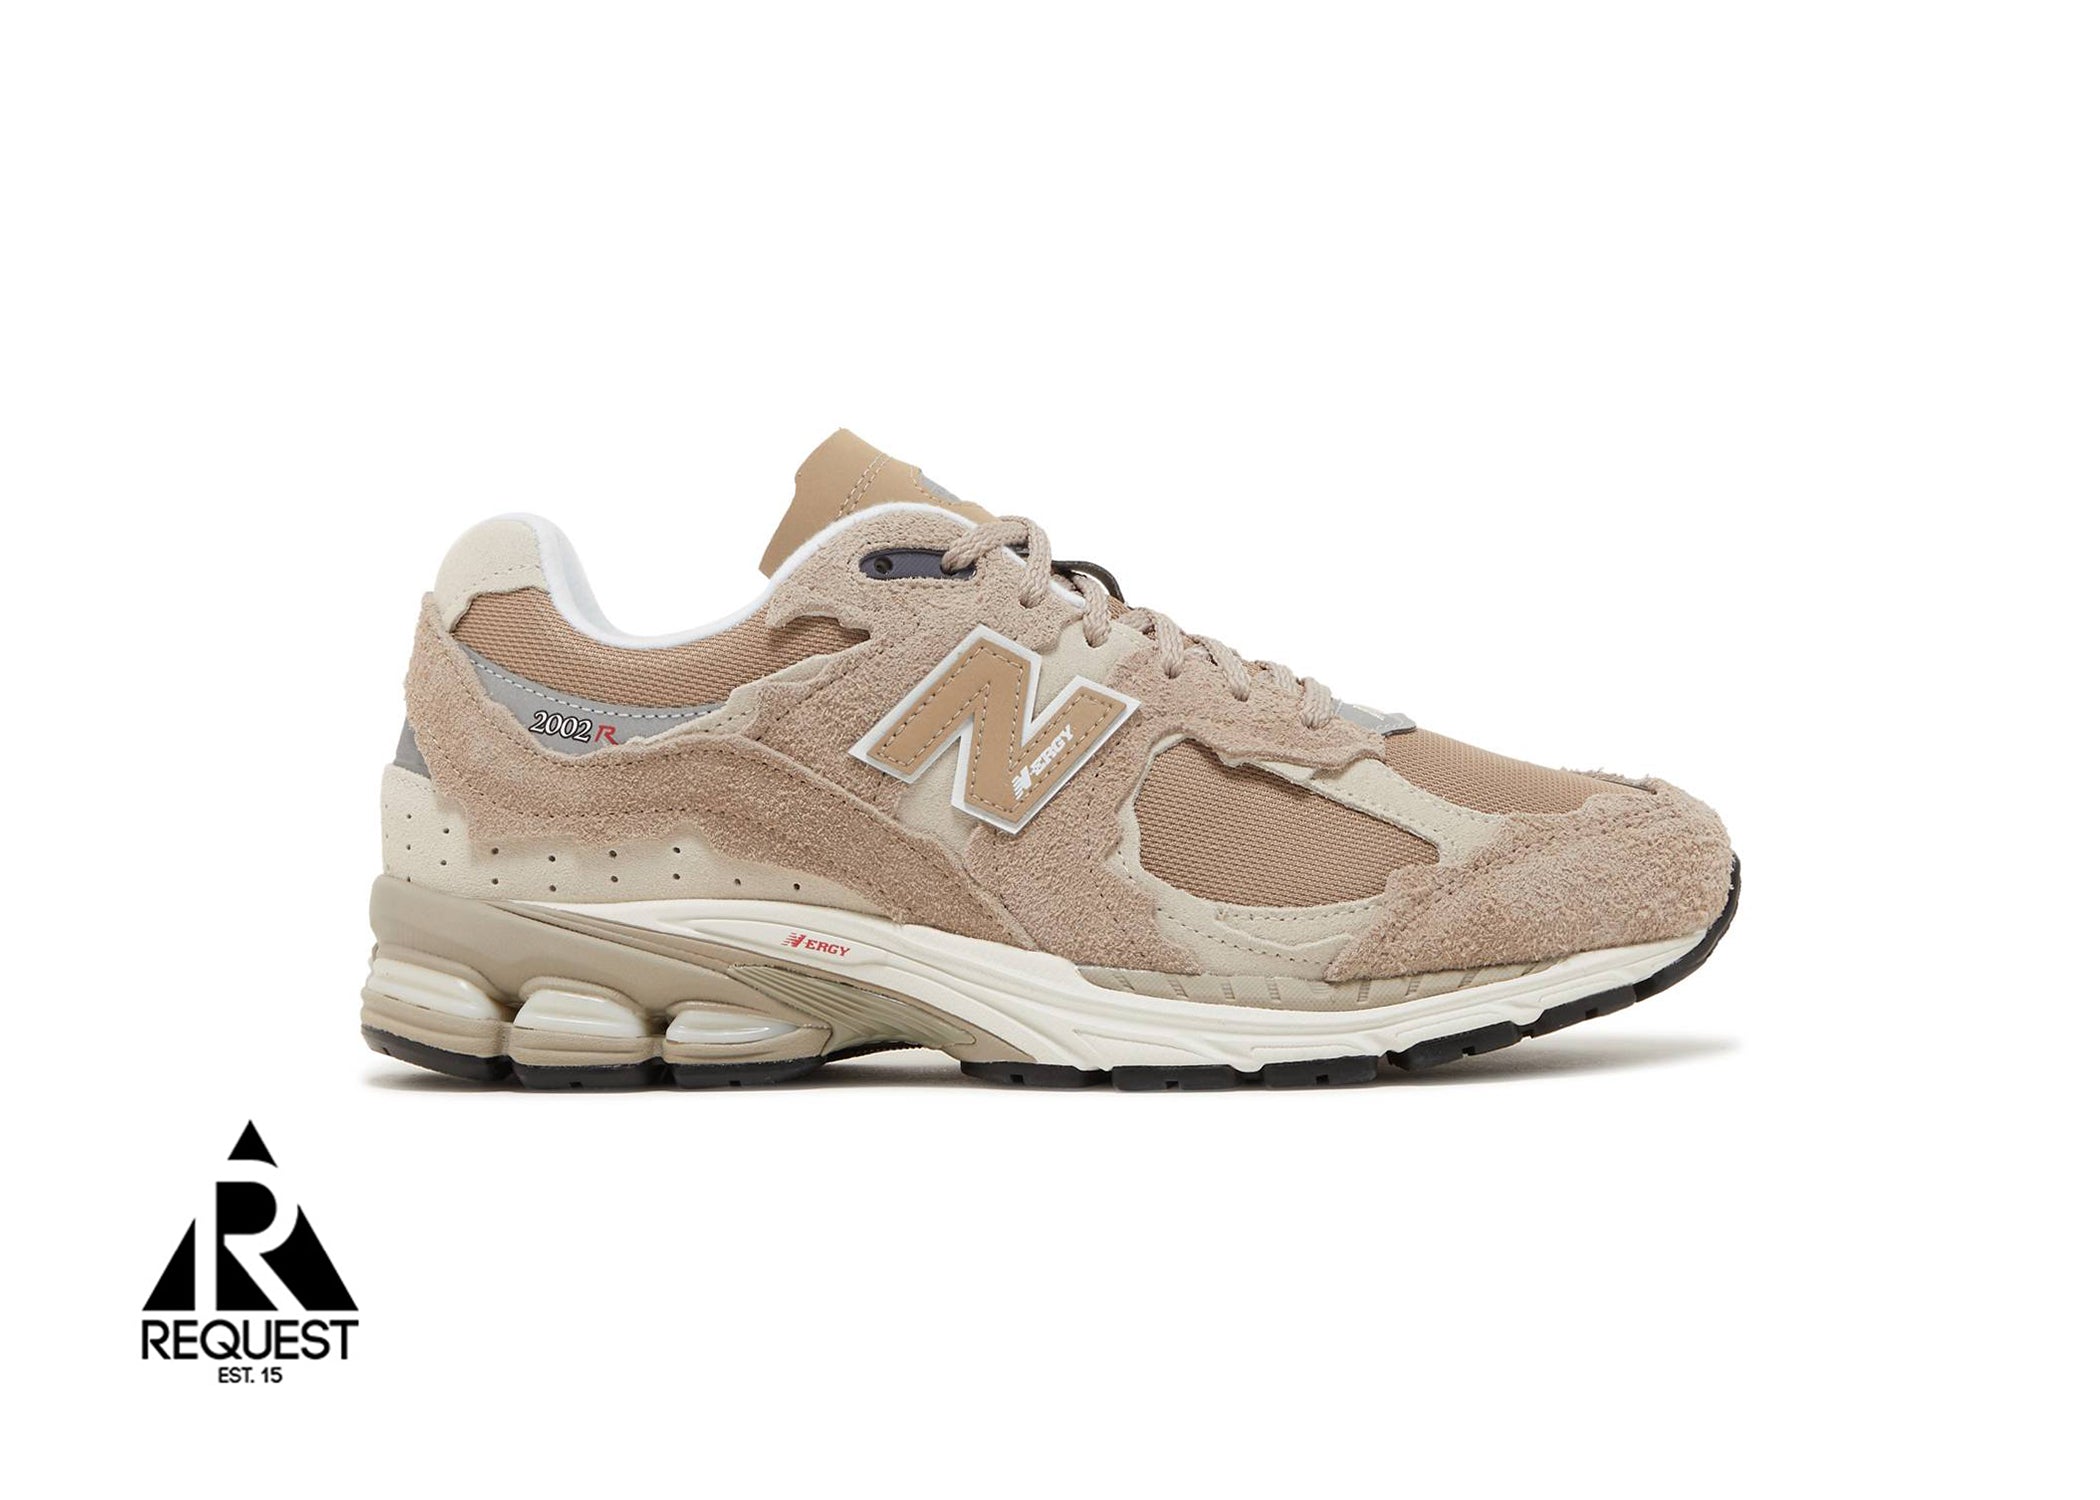 New Balance 2002R "Protection Pack Driftwood"